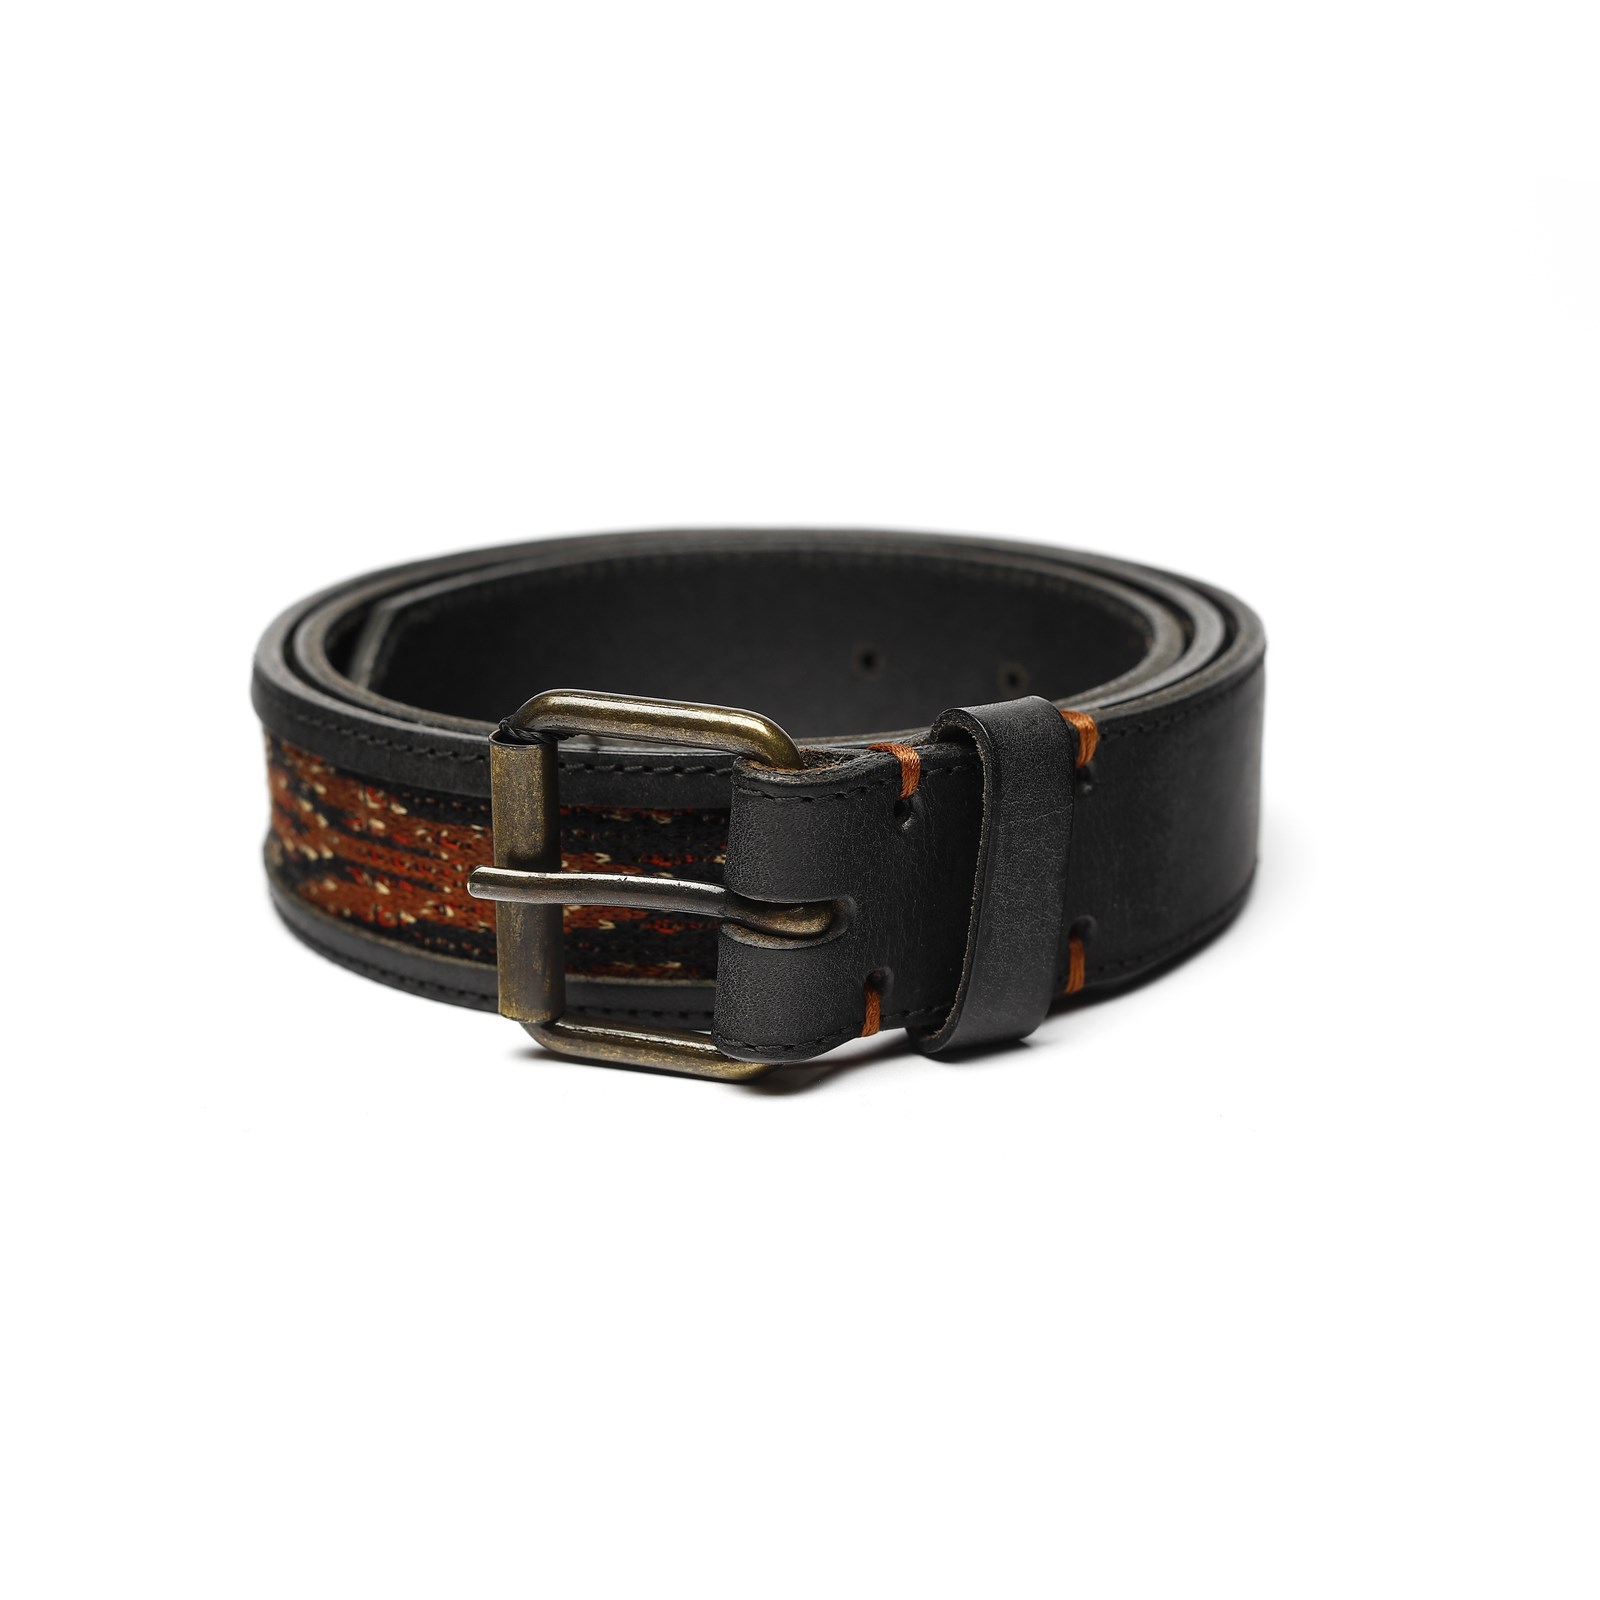 Men's belt in fabric and leather. (Missoni )